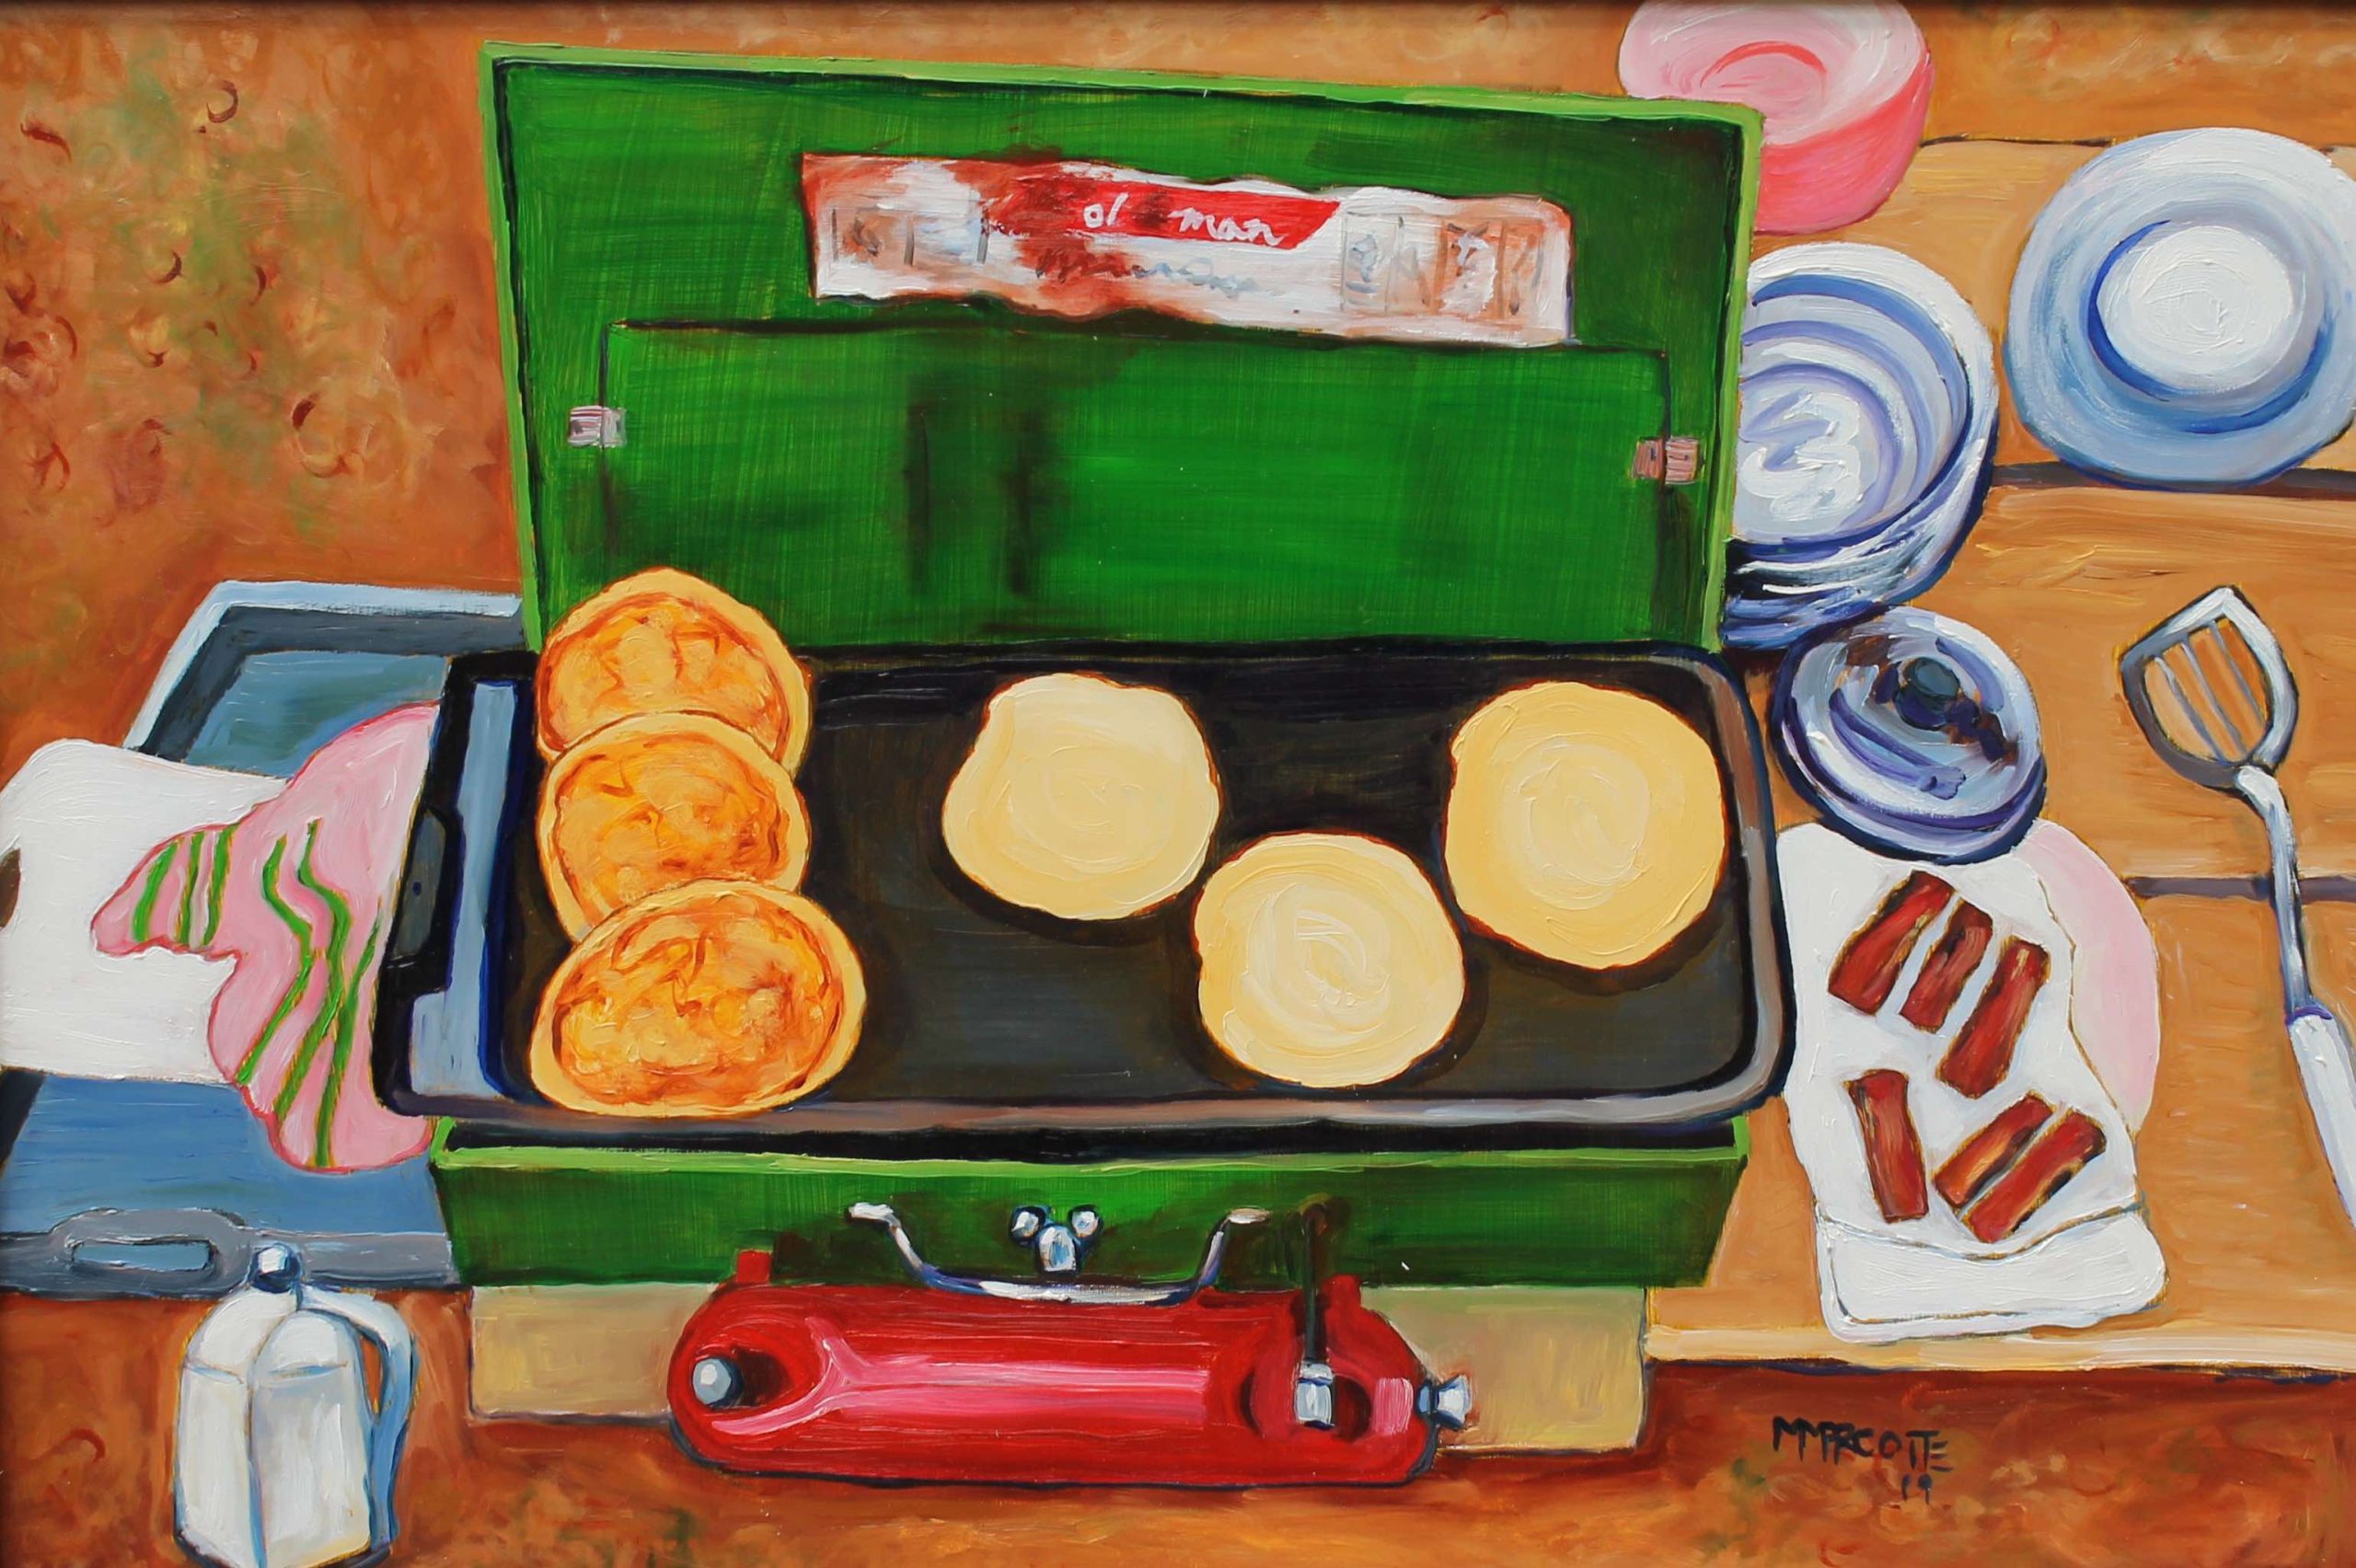 Michele Marcotte’s Paintings Make The Menu in Two Exhibits